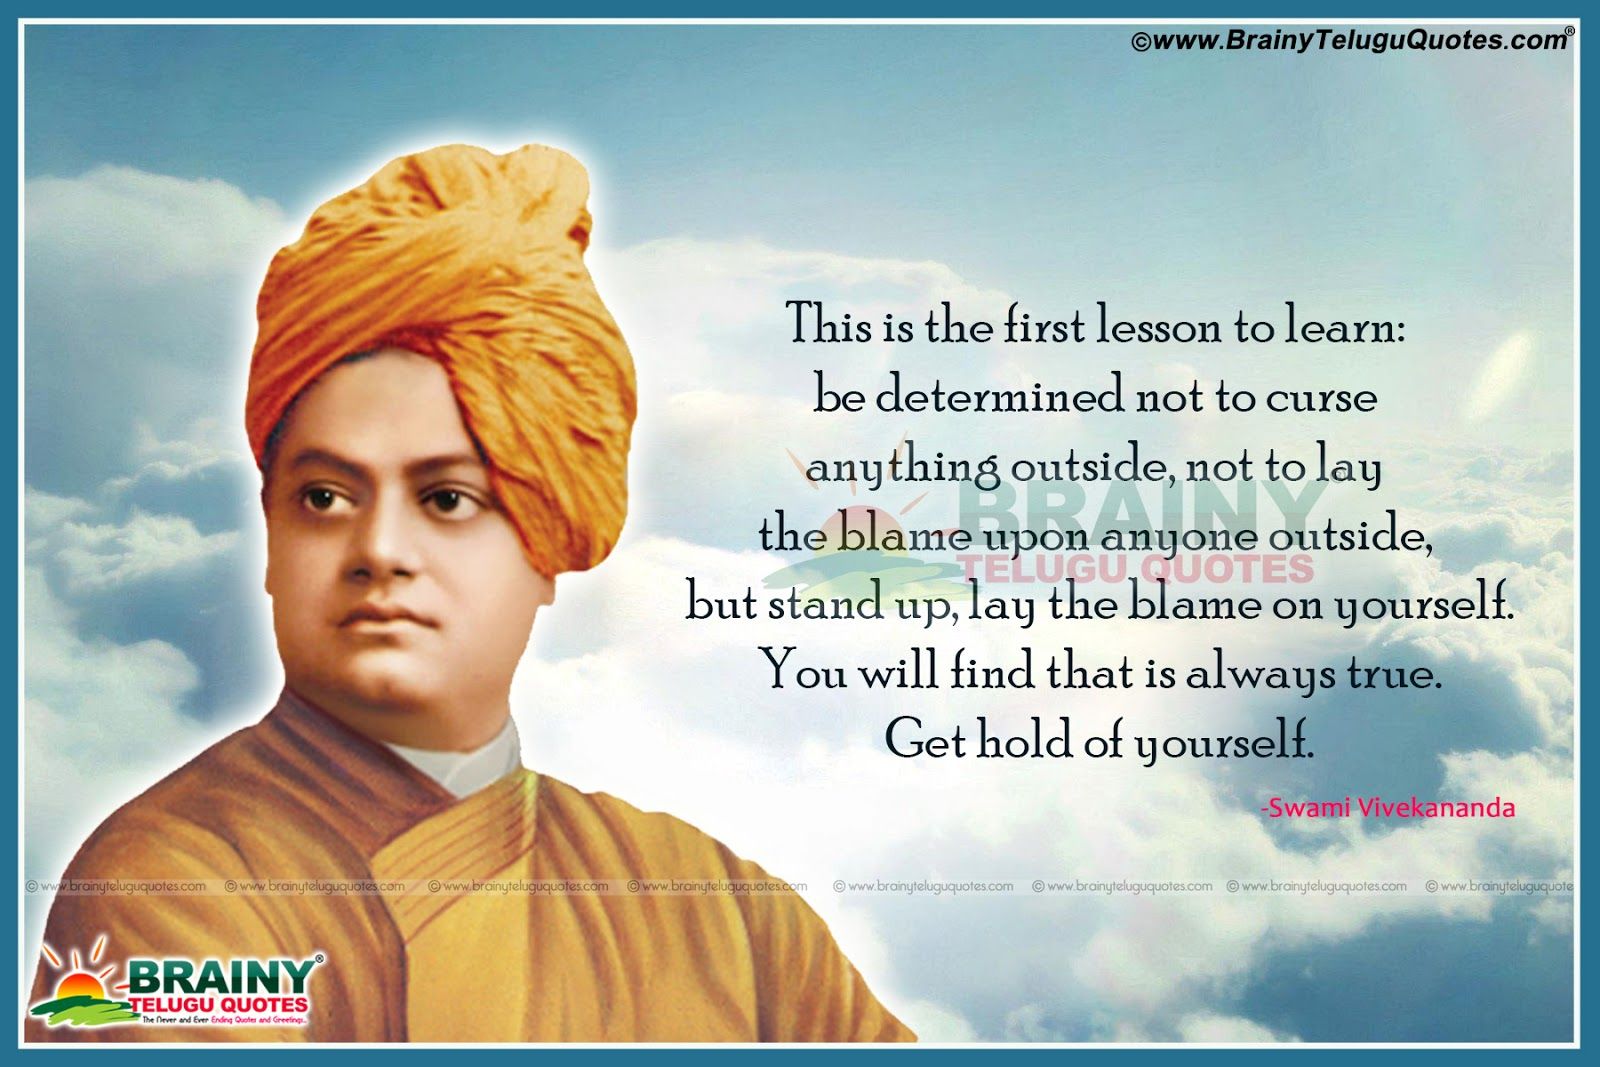 Famous Quotes By Swami Vivekananda wallpaper in English. BrainyTeluguQuotes.comTelugu quotes. English quotes. Hindi quotes. Tamil quotes. Greetings